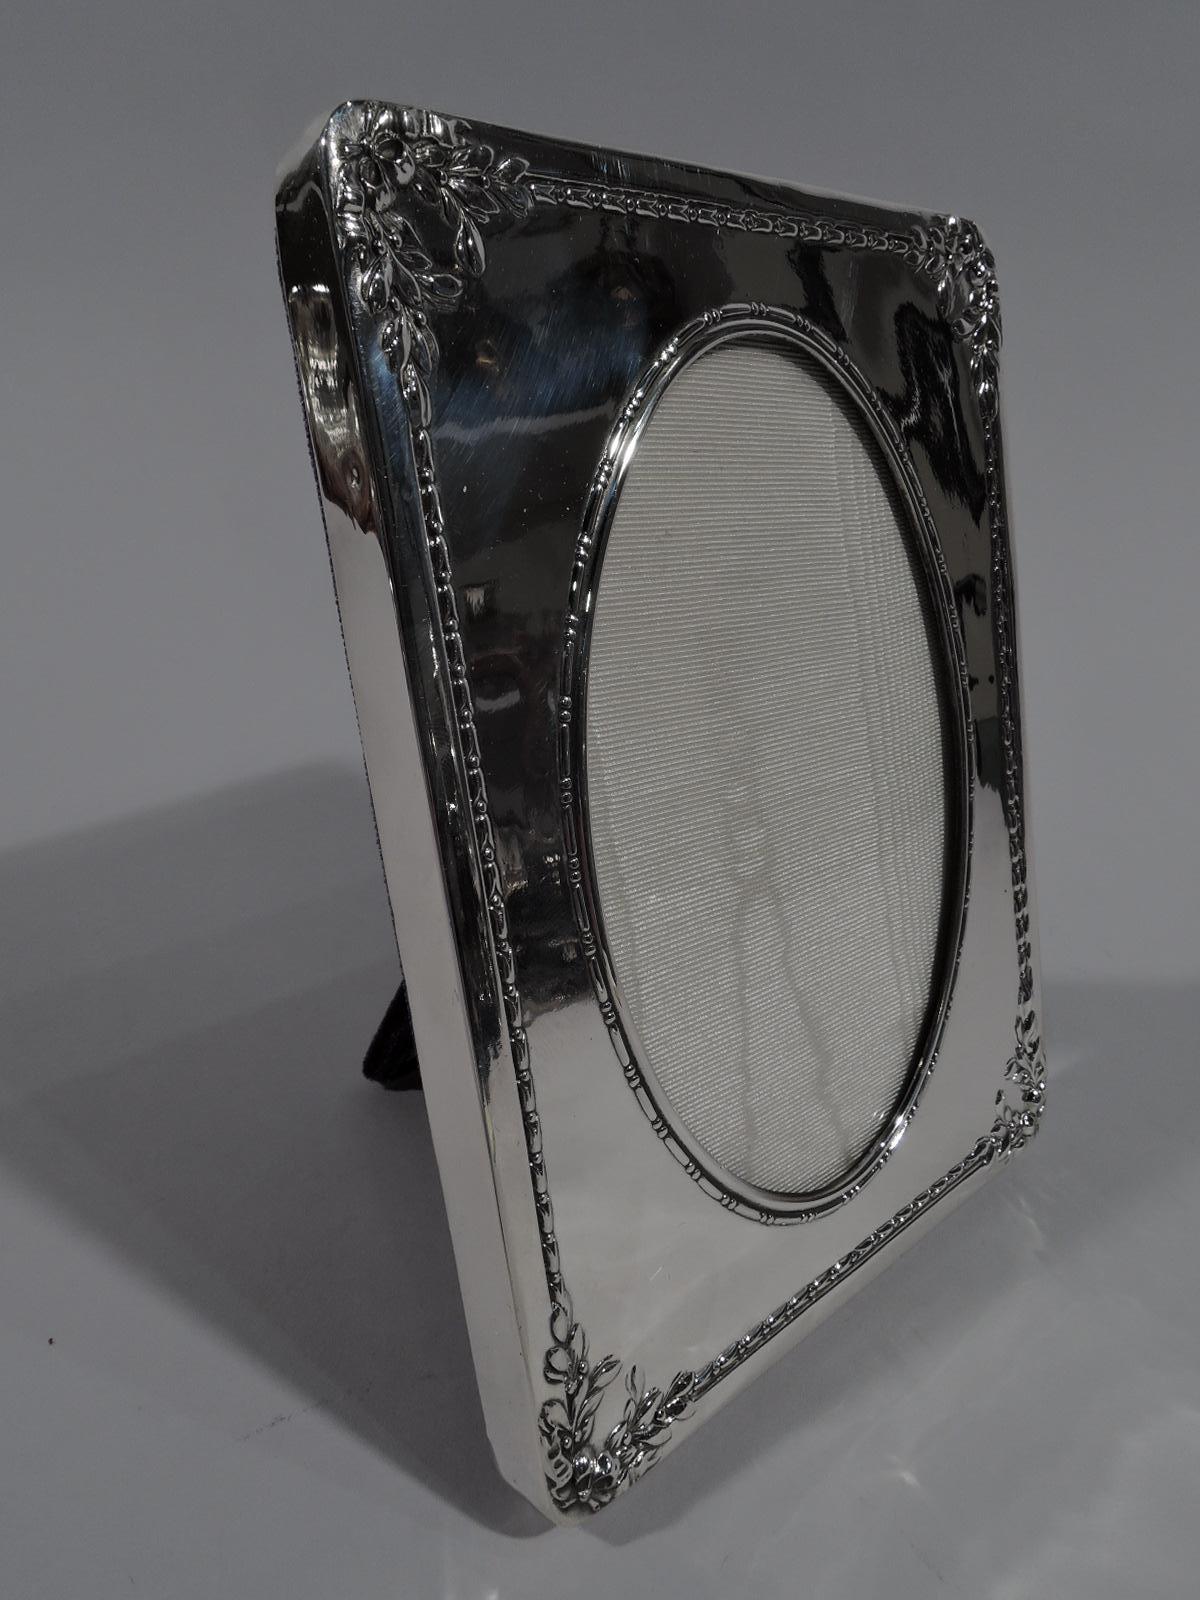 Edwardian sterling silver picture frame. Made by Reed & Barton in Taunton, Mass., circa 1915. Oval window with bead-and-reel border in rectangular surround with imbricated floral border; applied flat rim and ribbon-tied wreaths at corners. With